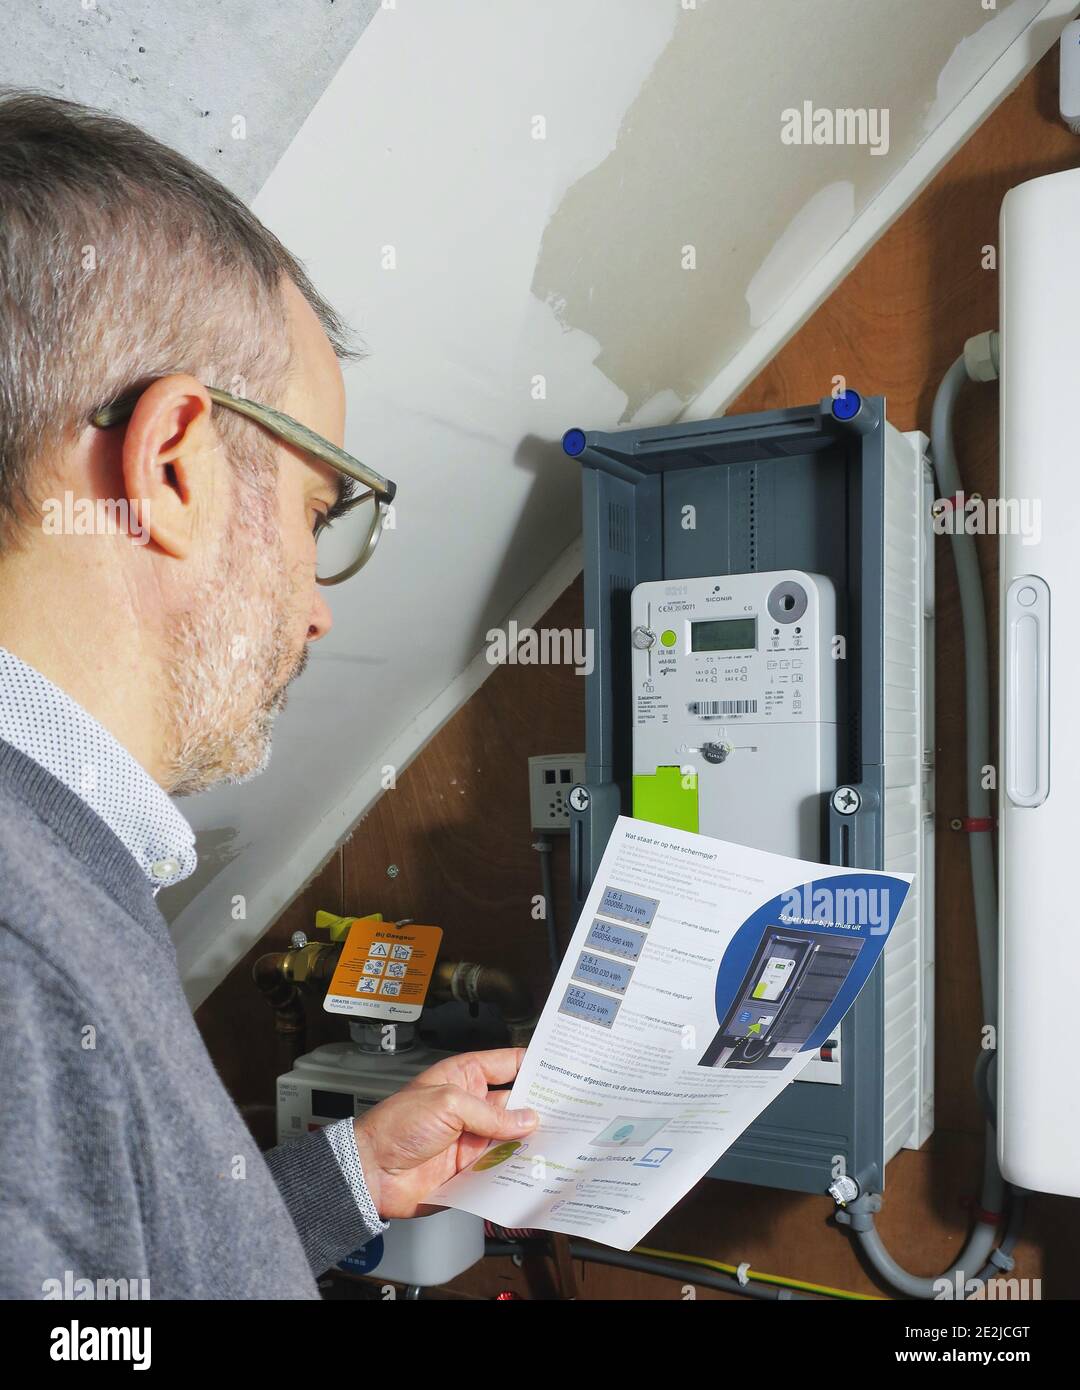 Illustration picture shows a man inspecting his Sagemcom smart electricity  meter in Gent, on Thursday 14 January 2021. BELGA PHOTO CHLOE FRANCOIS  Stock Photo - Alamy